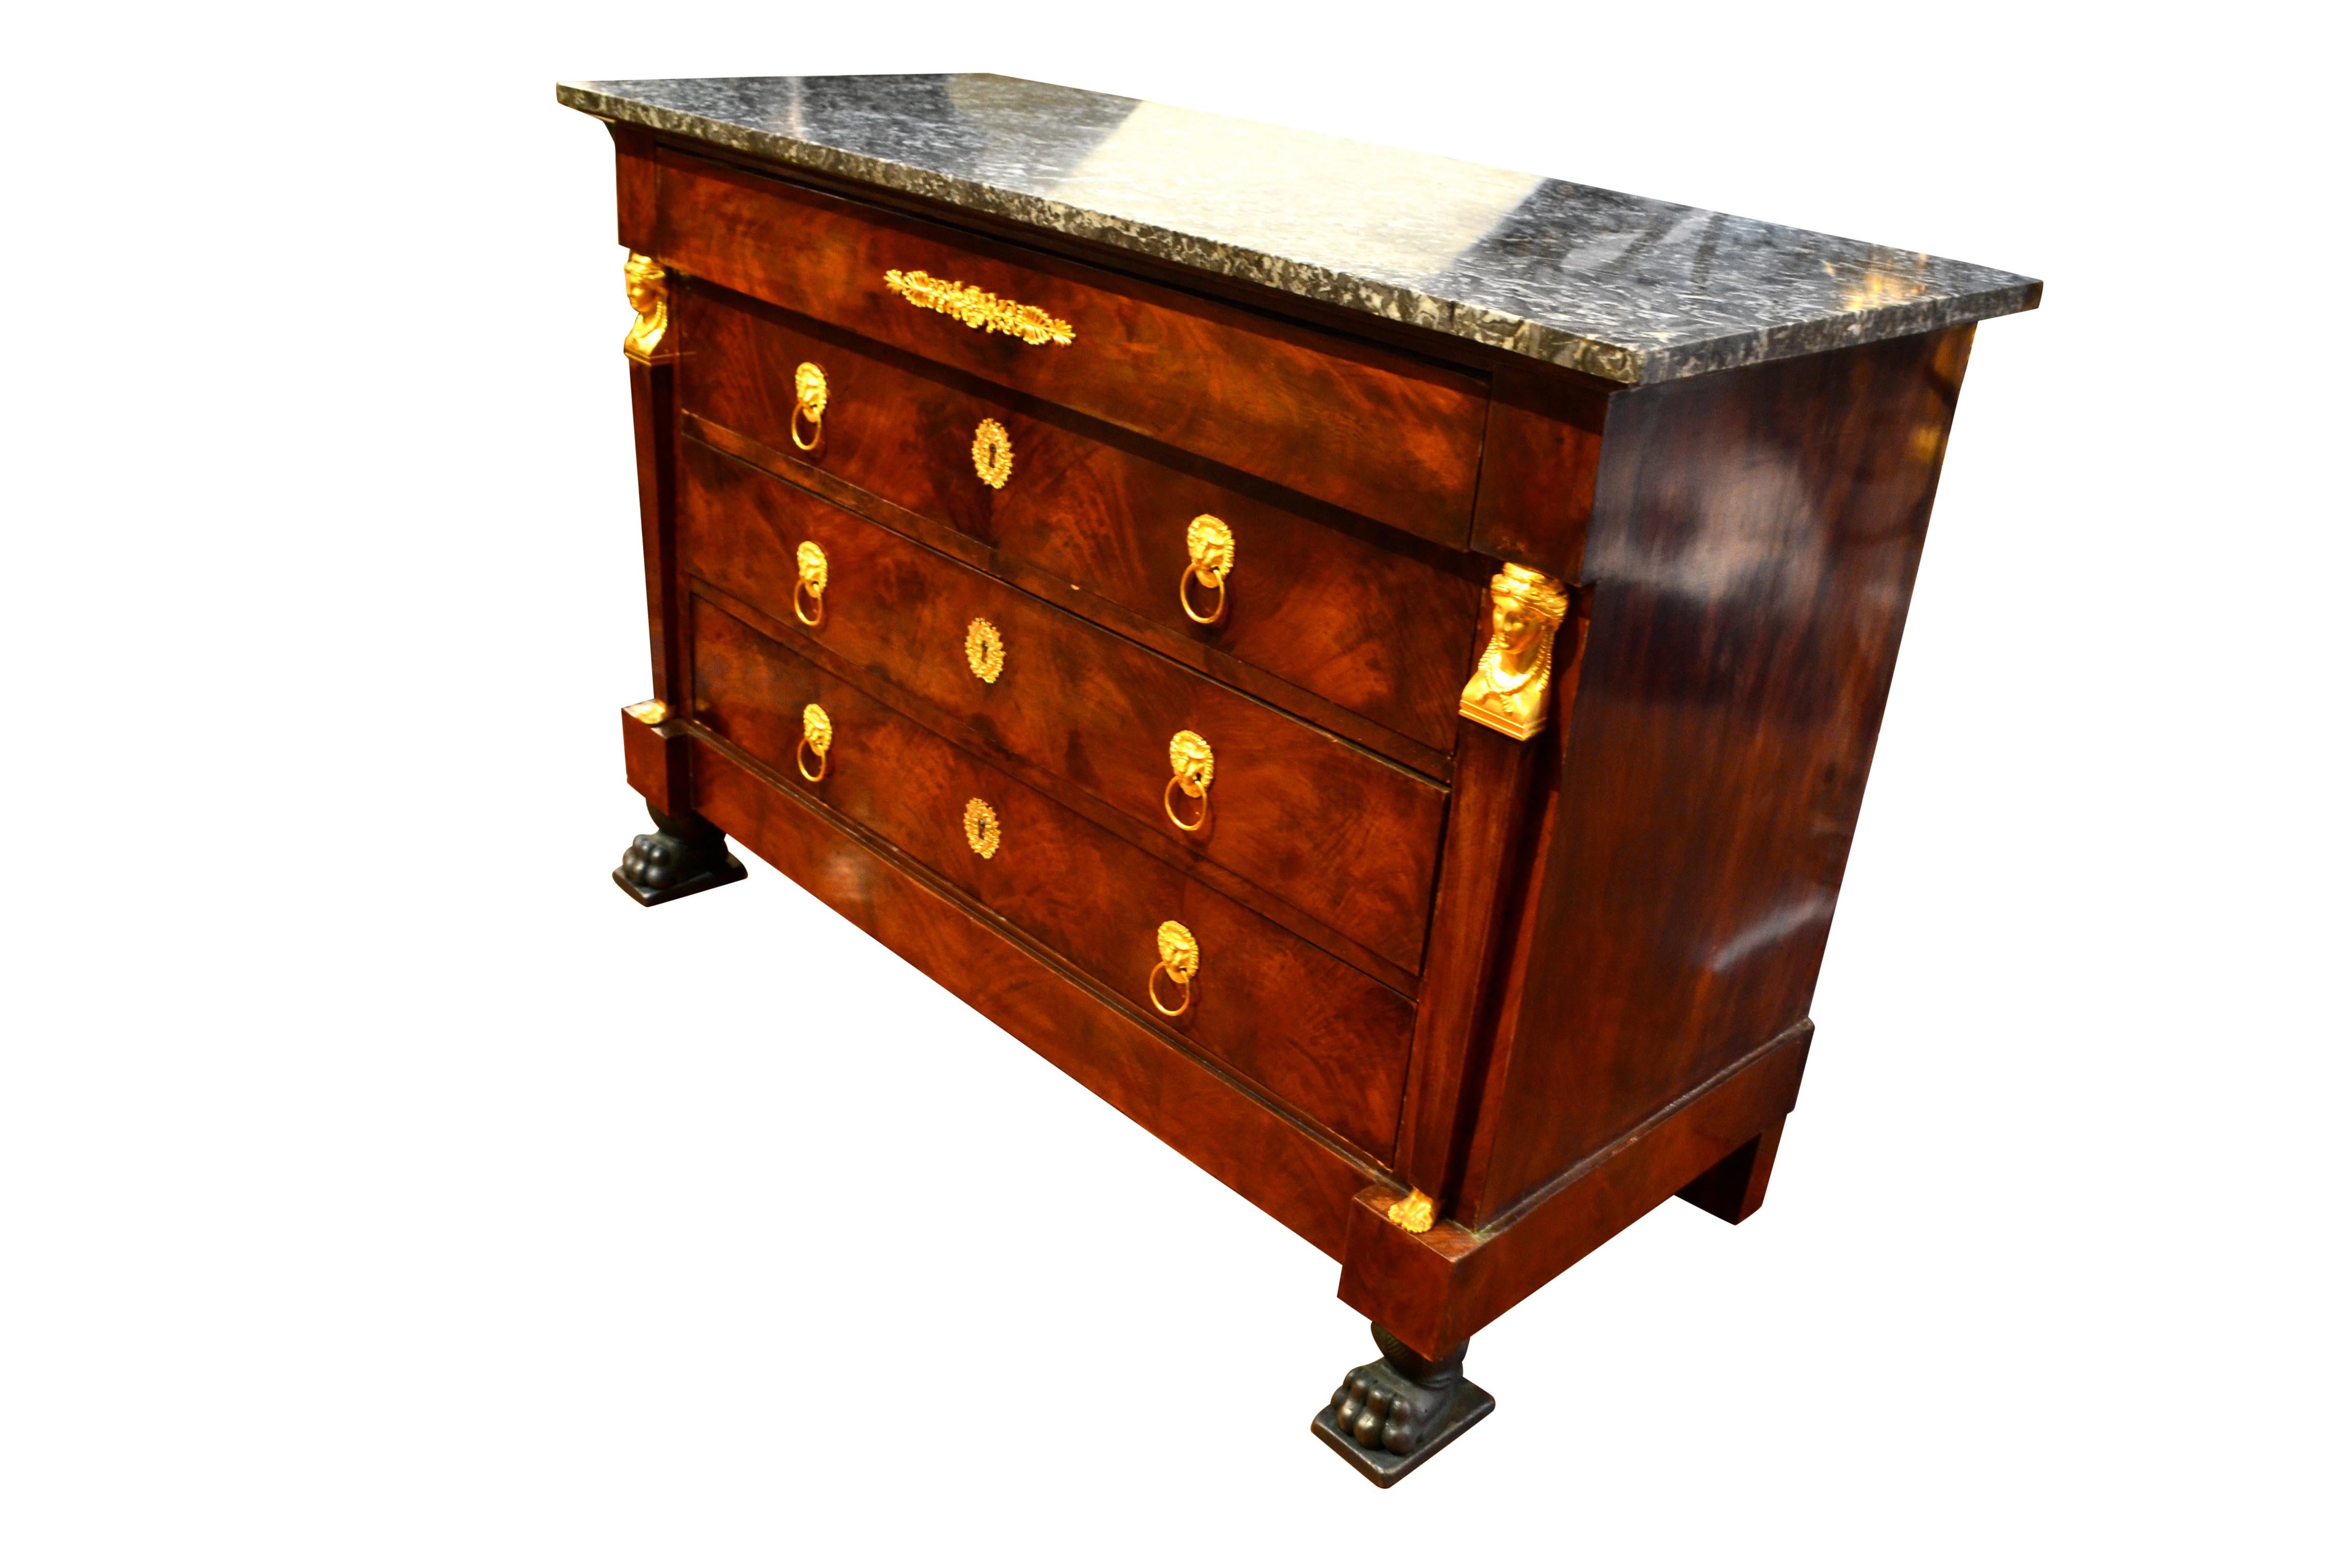 Gilt Period French Empire Chest of Drawers